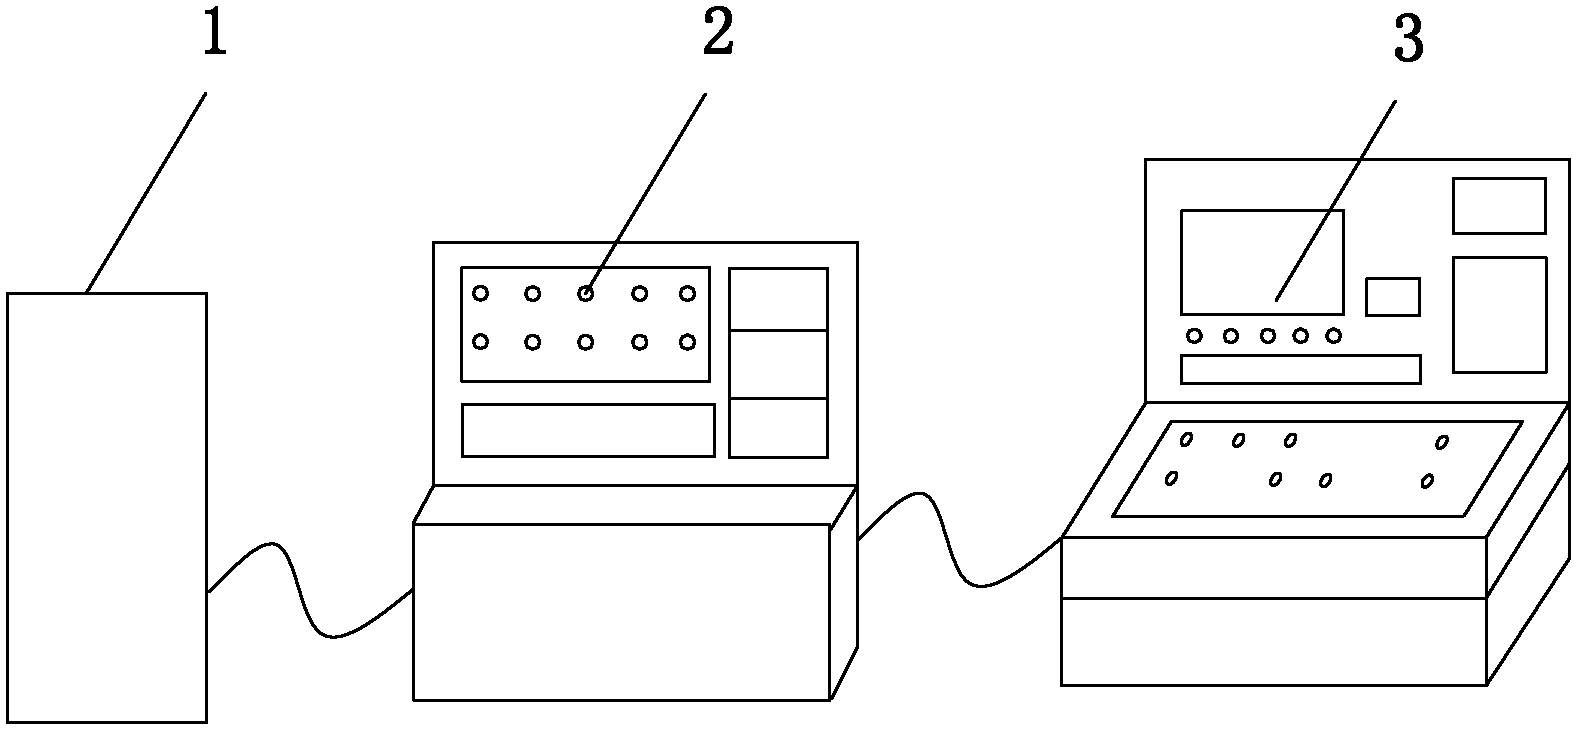 Teaching training table for alternating-current variable-frequency multi-unit air conditioning unit